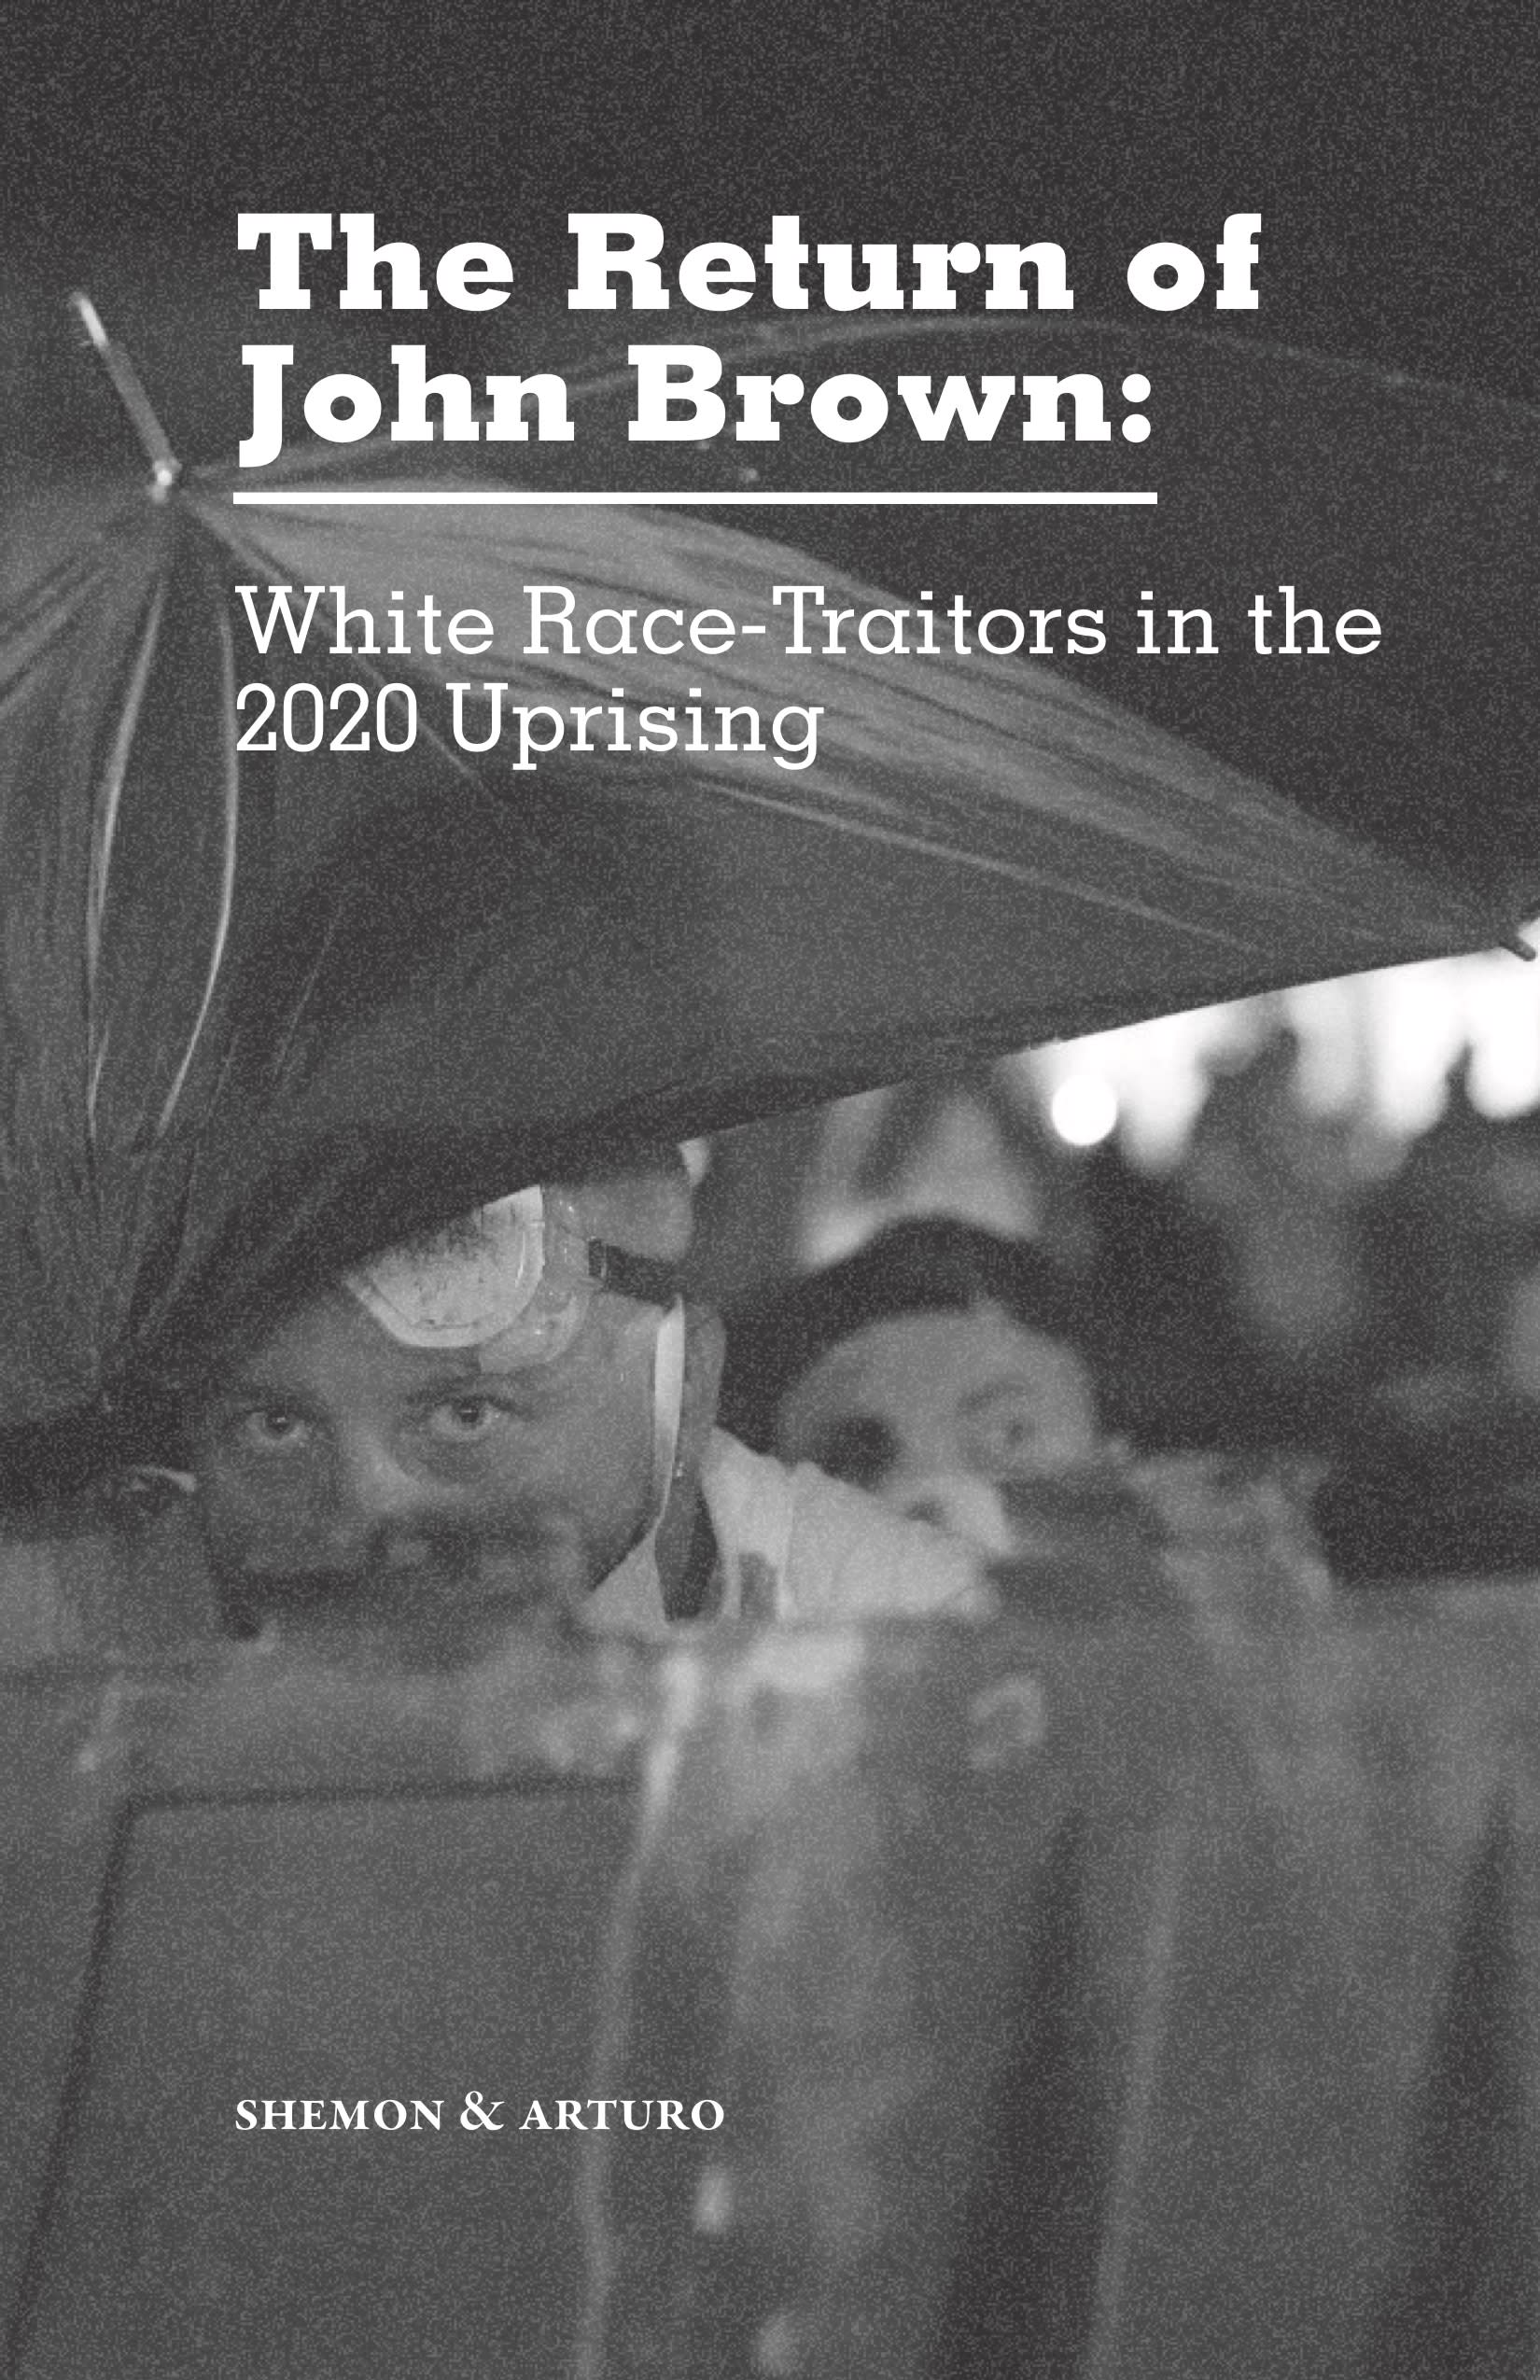 Cover Image for The Return of John-Brown: White Race-Traitors in the 2020 Uprising